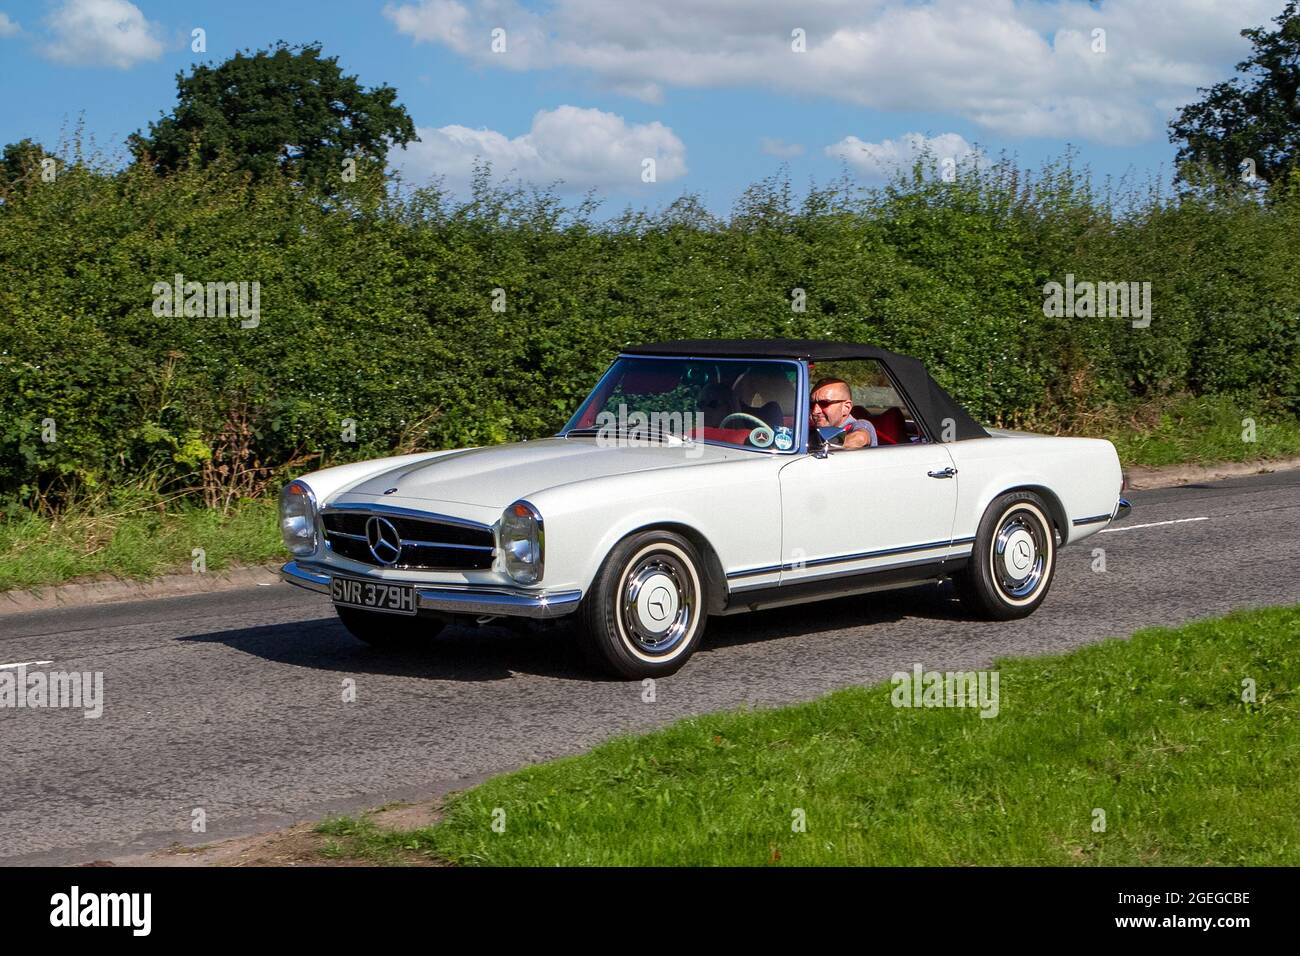 A front view of a 1970s 70s Petrol Mercedes 280 Sl White vintage classic car retro driver vehicle automobile Stock Photo